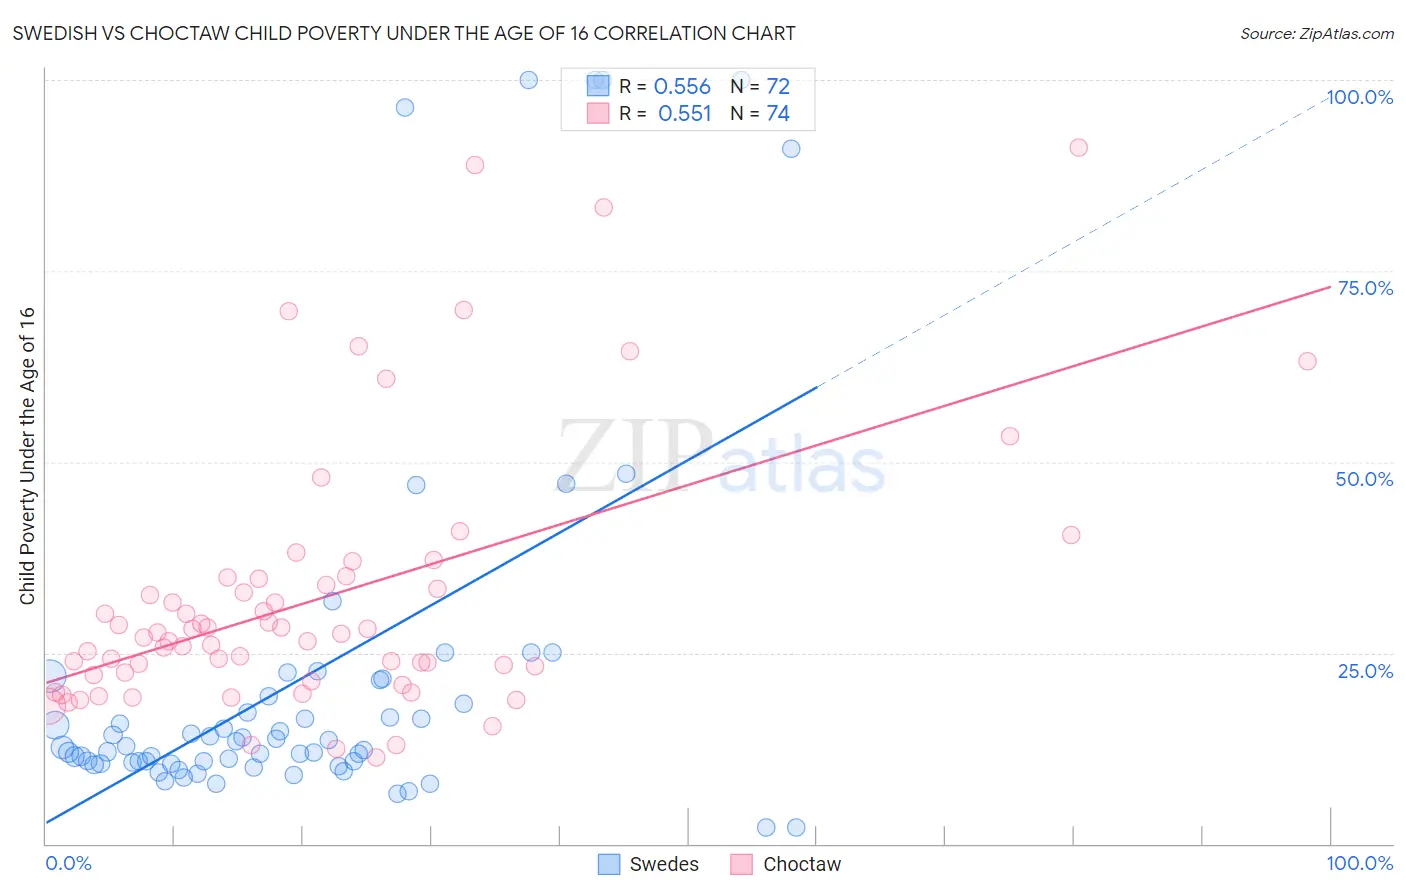 Swedish vs Choctaw Child Poverty Under the Age of 16